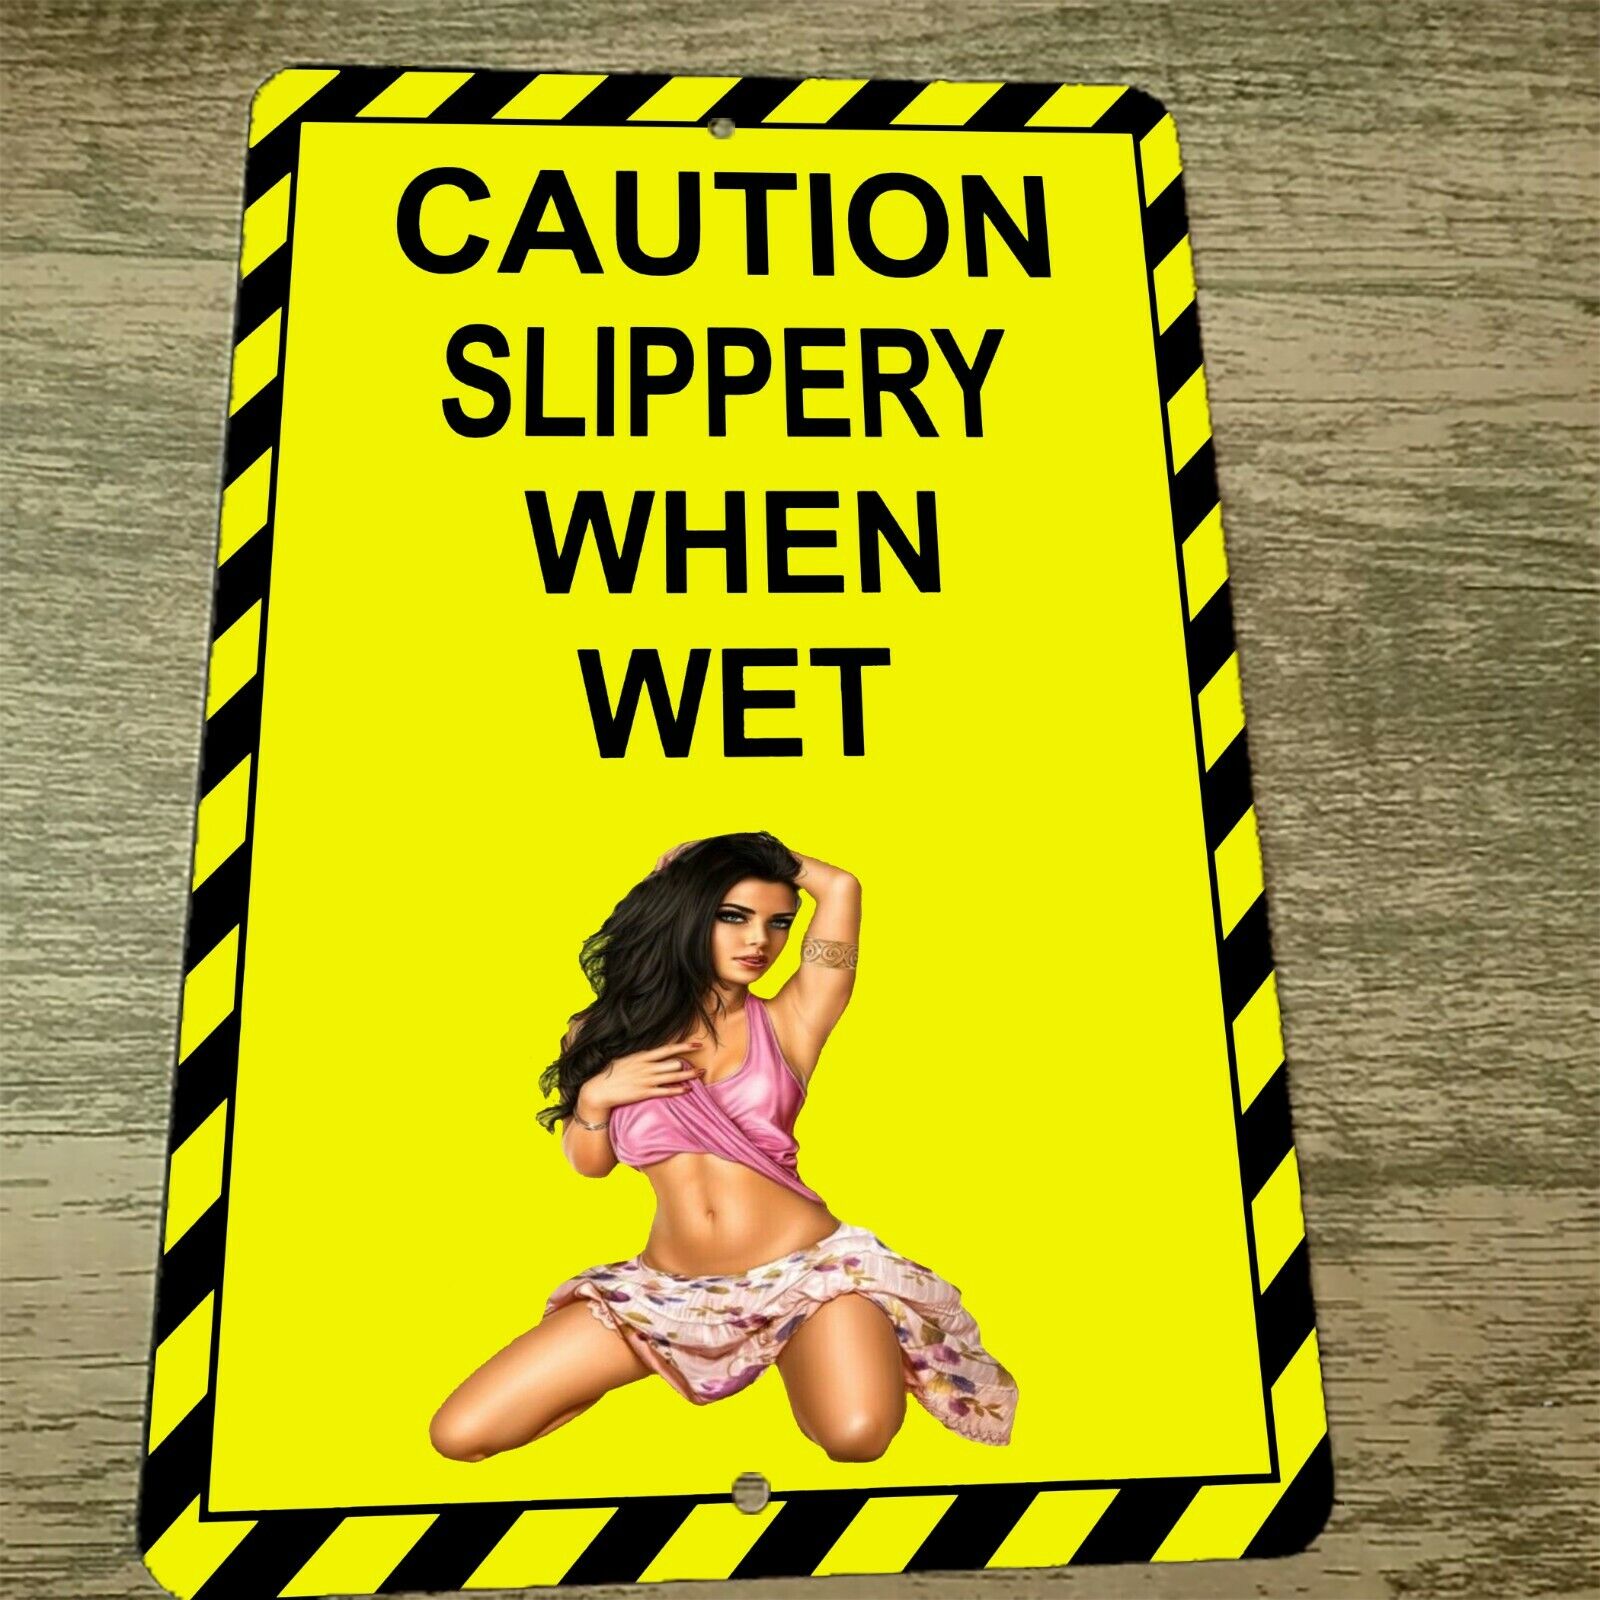 Caution Slippery When Wet 8x12 Metal Wall Sign